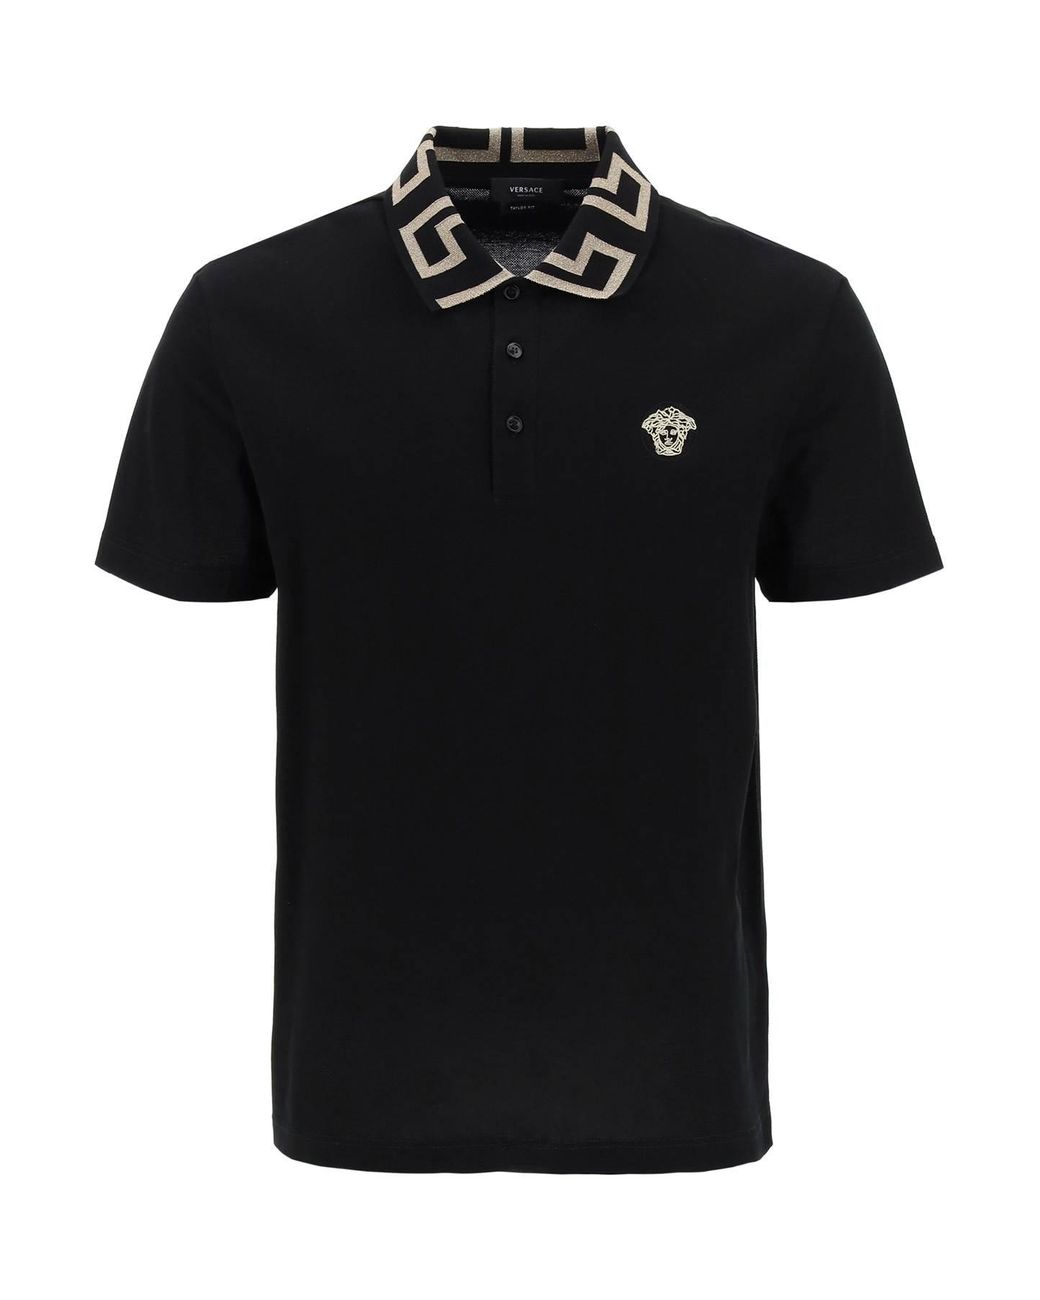 Versace Cotton Taylor Fit Polo Shirt With Greca Collar in Black,Gold ...